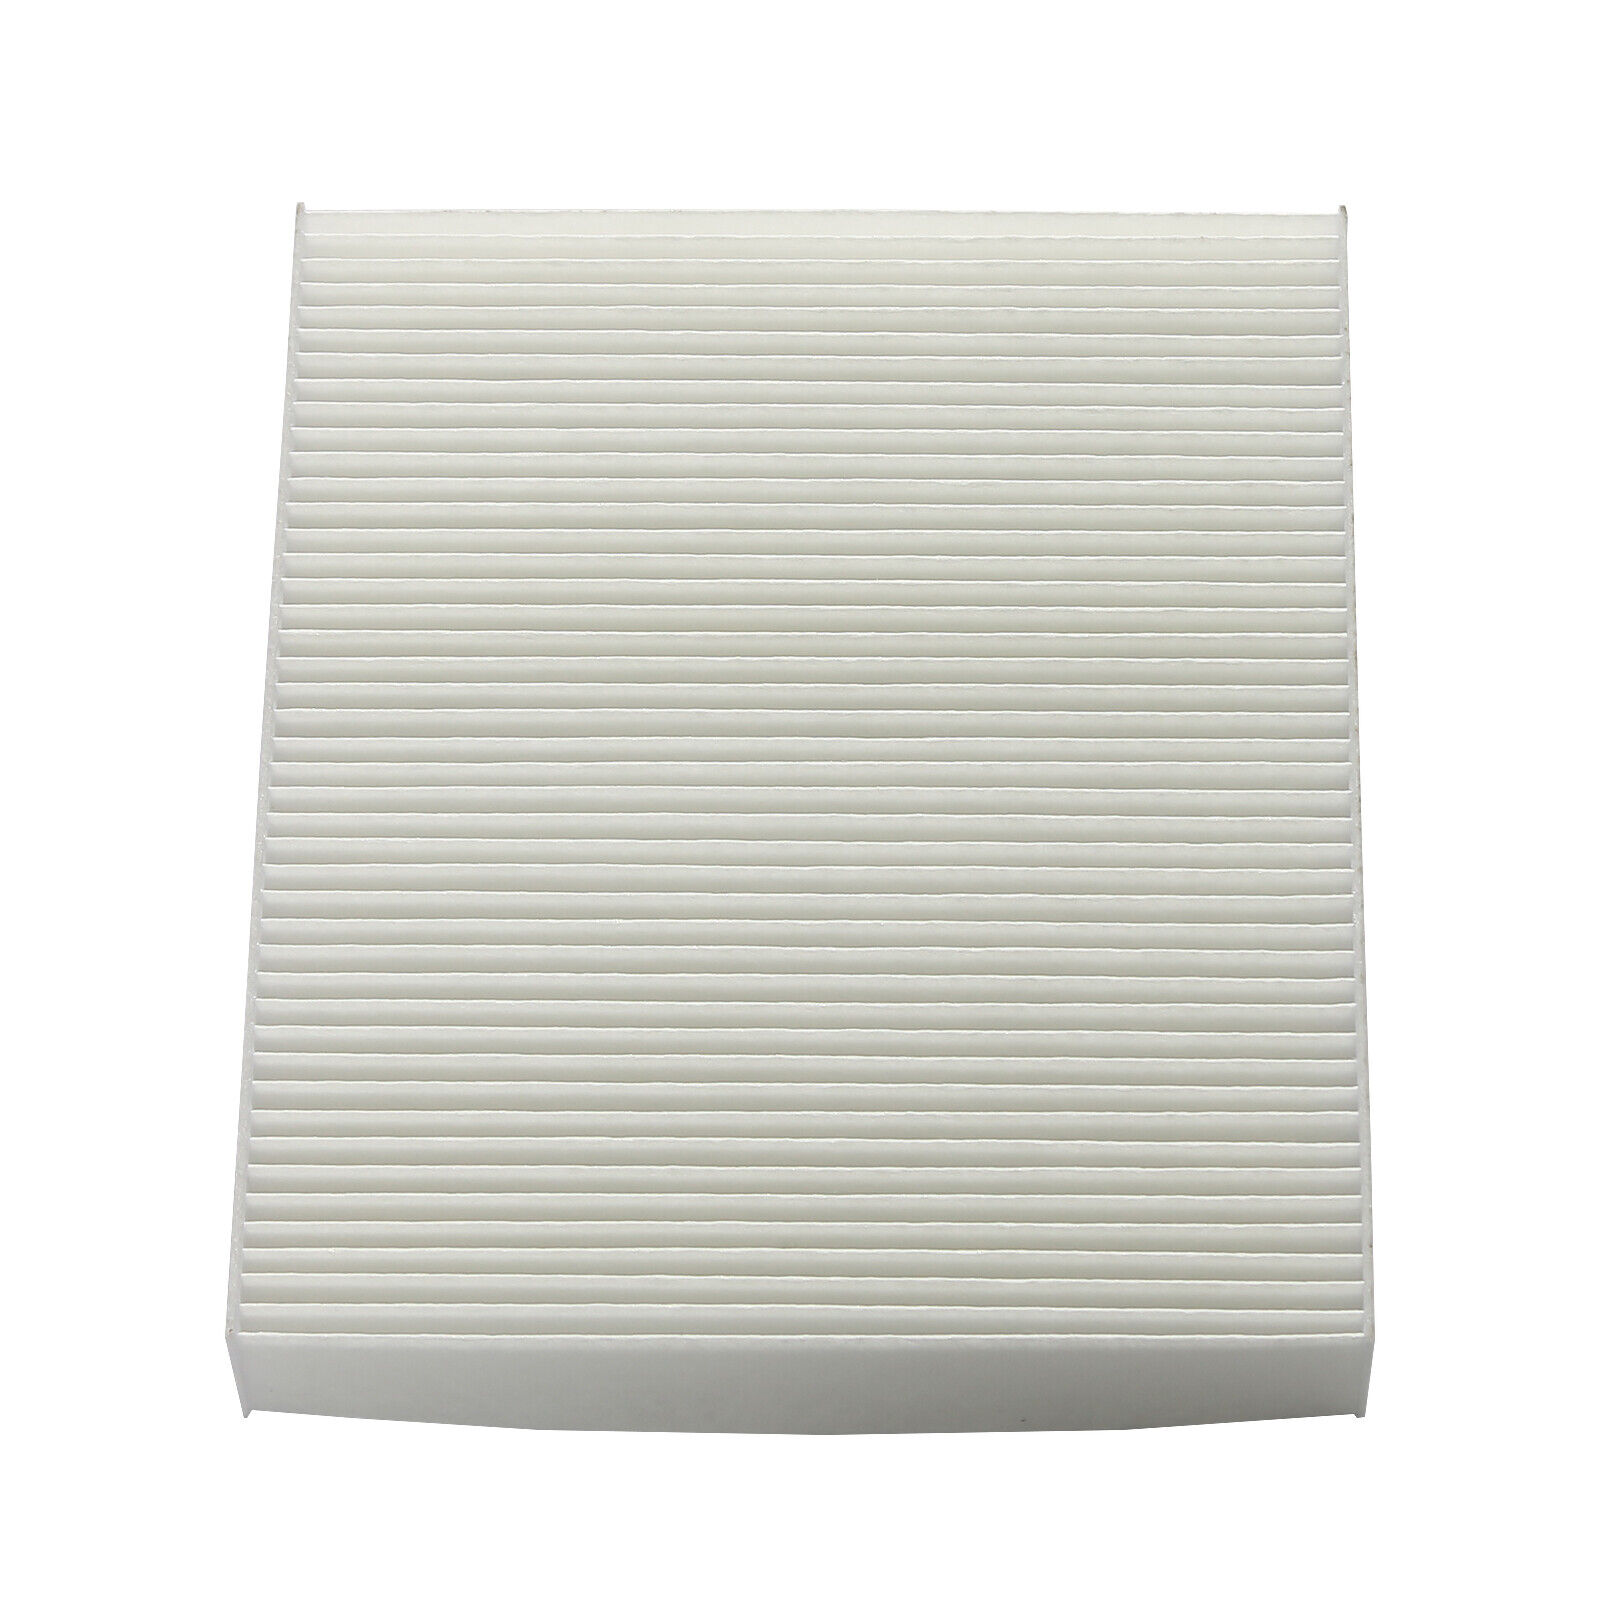 Cabin Air Filter Fit for Buick Regal Verano 2012-2013 Allure Chevy Cruze C36154